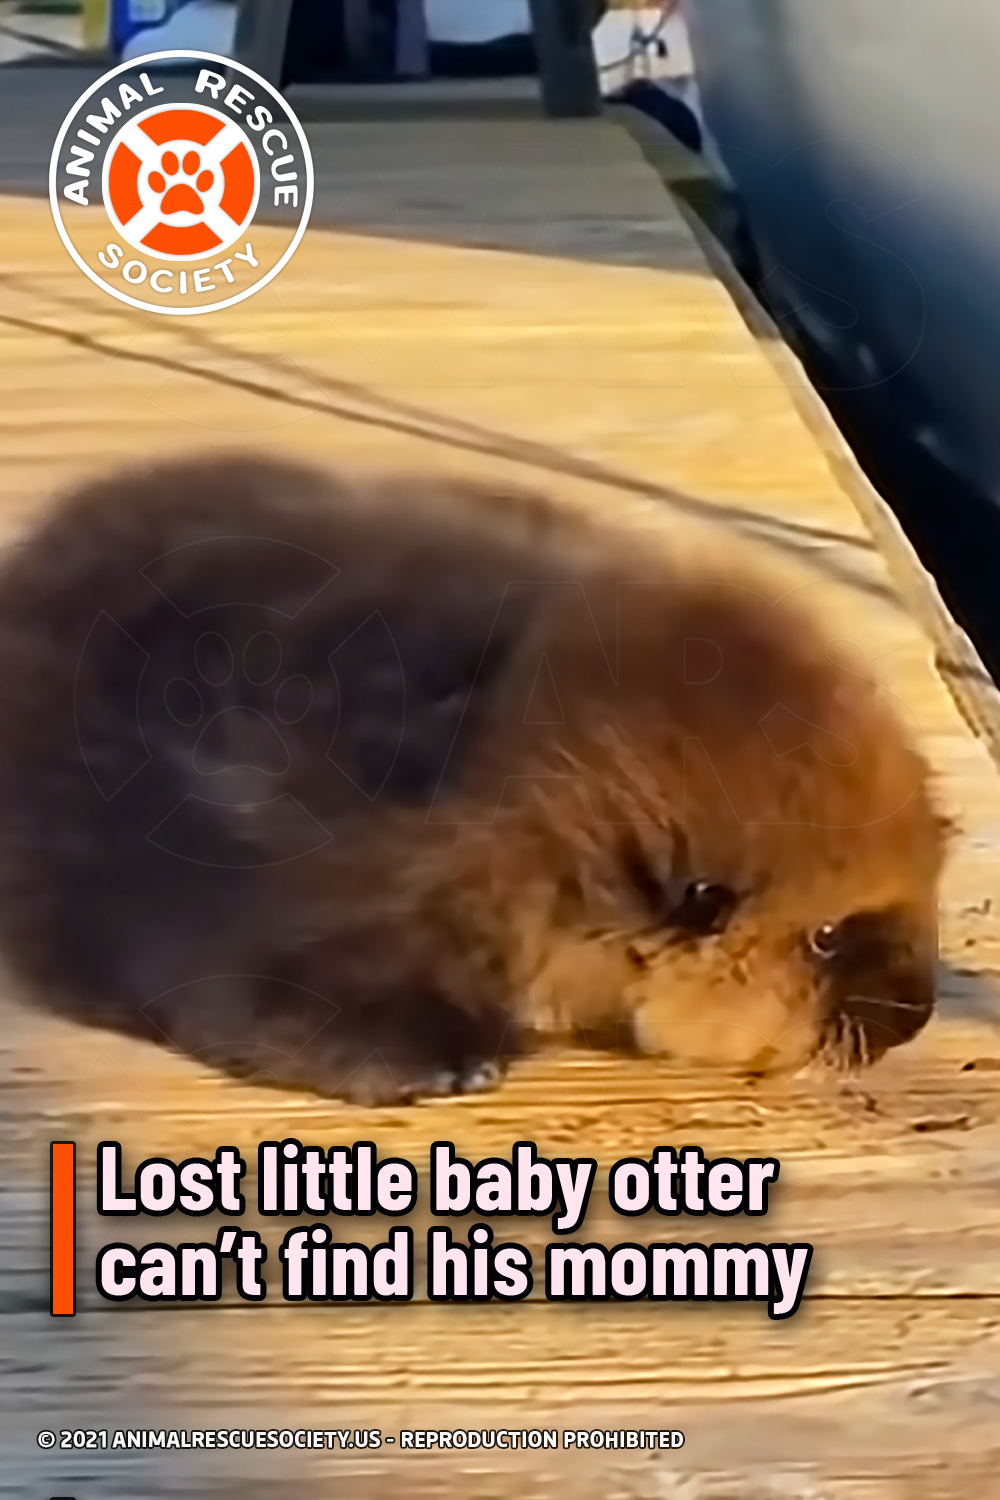 Lost little baby otter can’t find his mommy